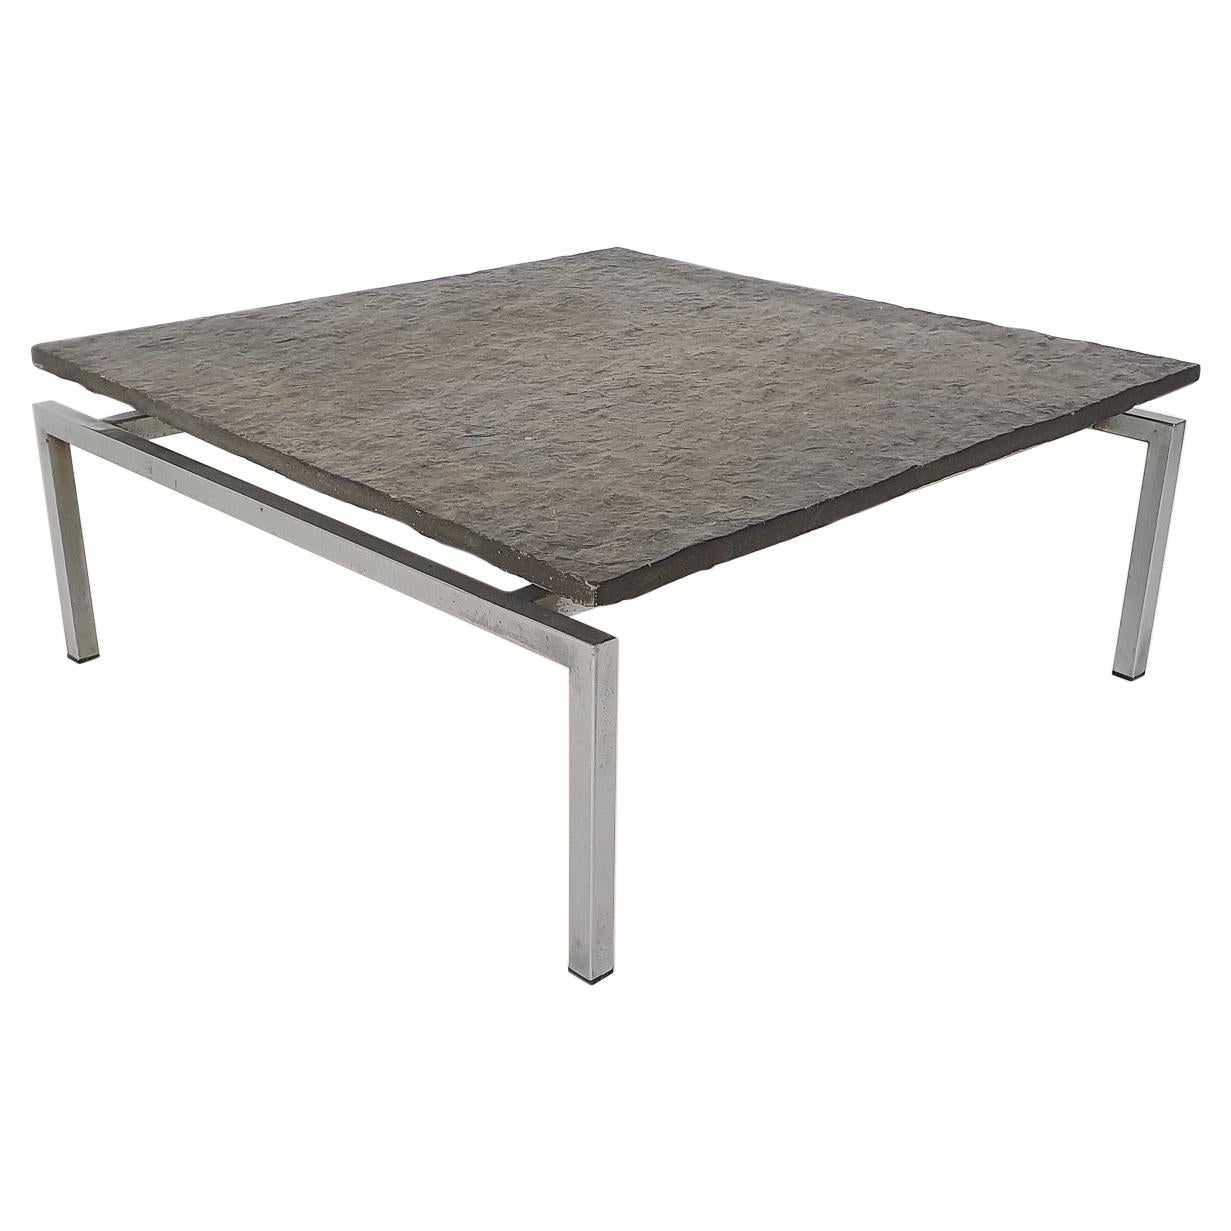 Dutch Modern Brutalist Natural Stone and Steel Coffee Table, 1950s For Sale